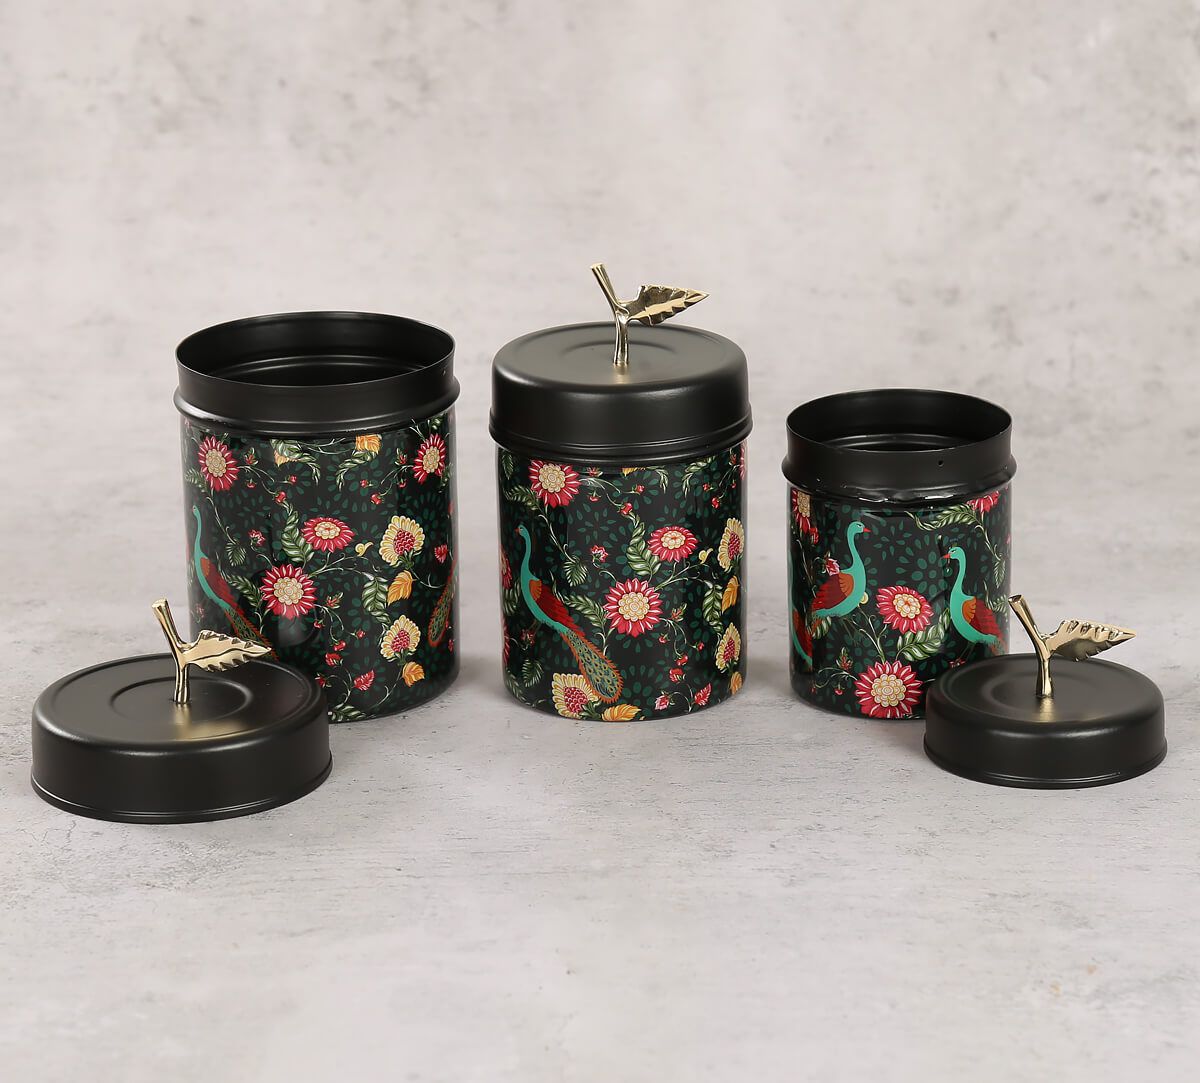 India Circus by Krsnaa Mehta Feathers & florals Steel Container Set of 3